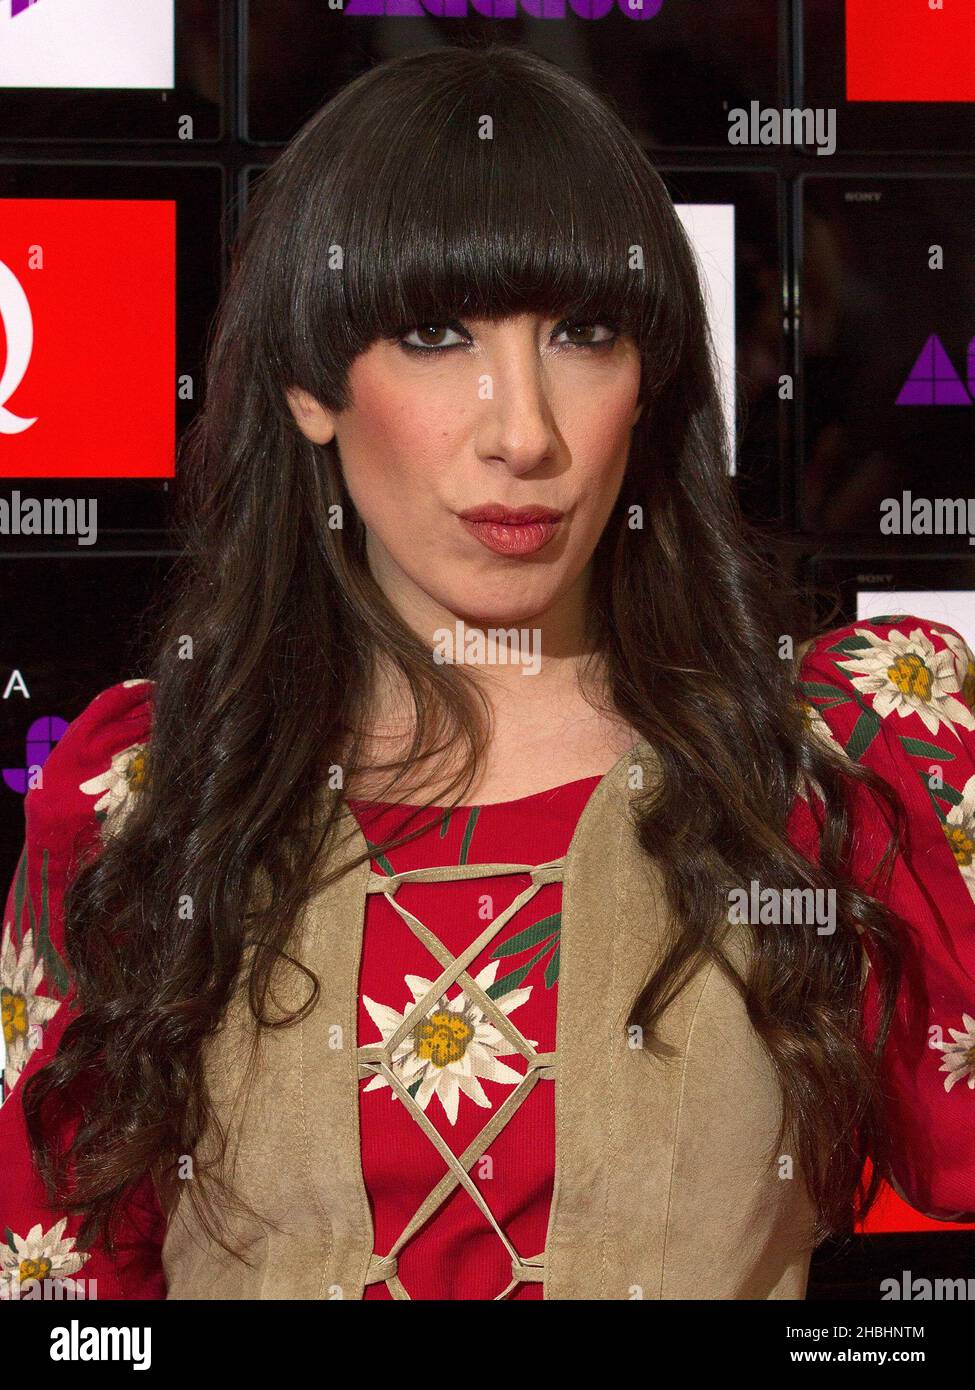 Lady Starlight attends the Xperia Access Q Awards at the Grosvenor House Hotel in London. Stock Photo